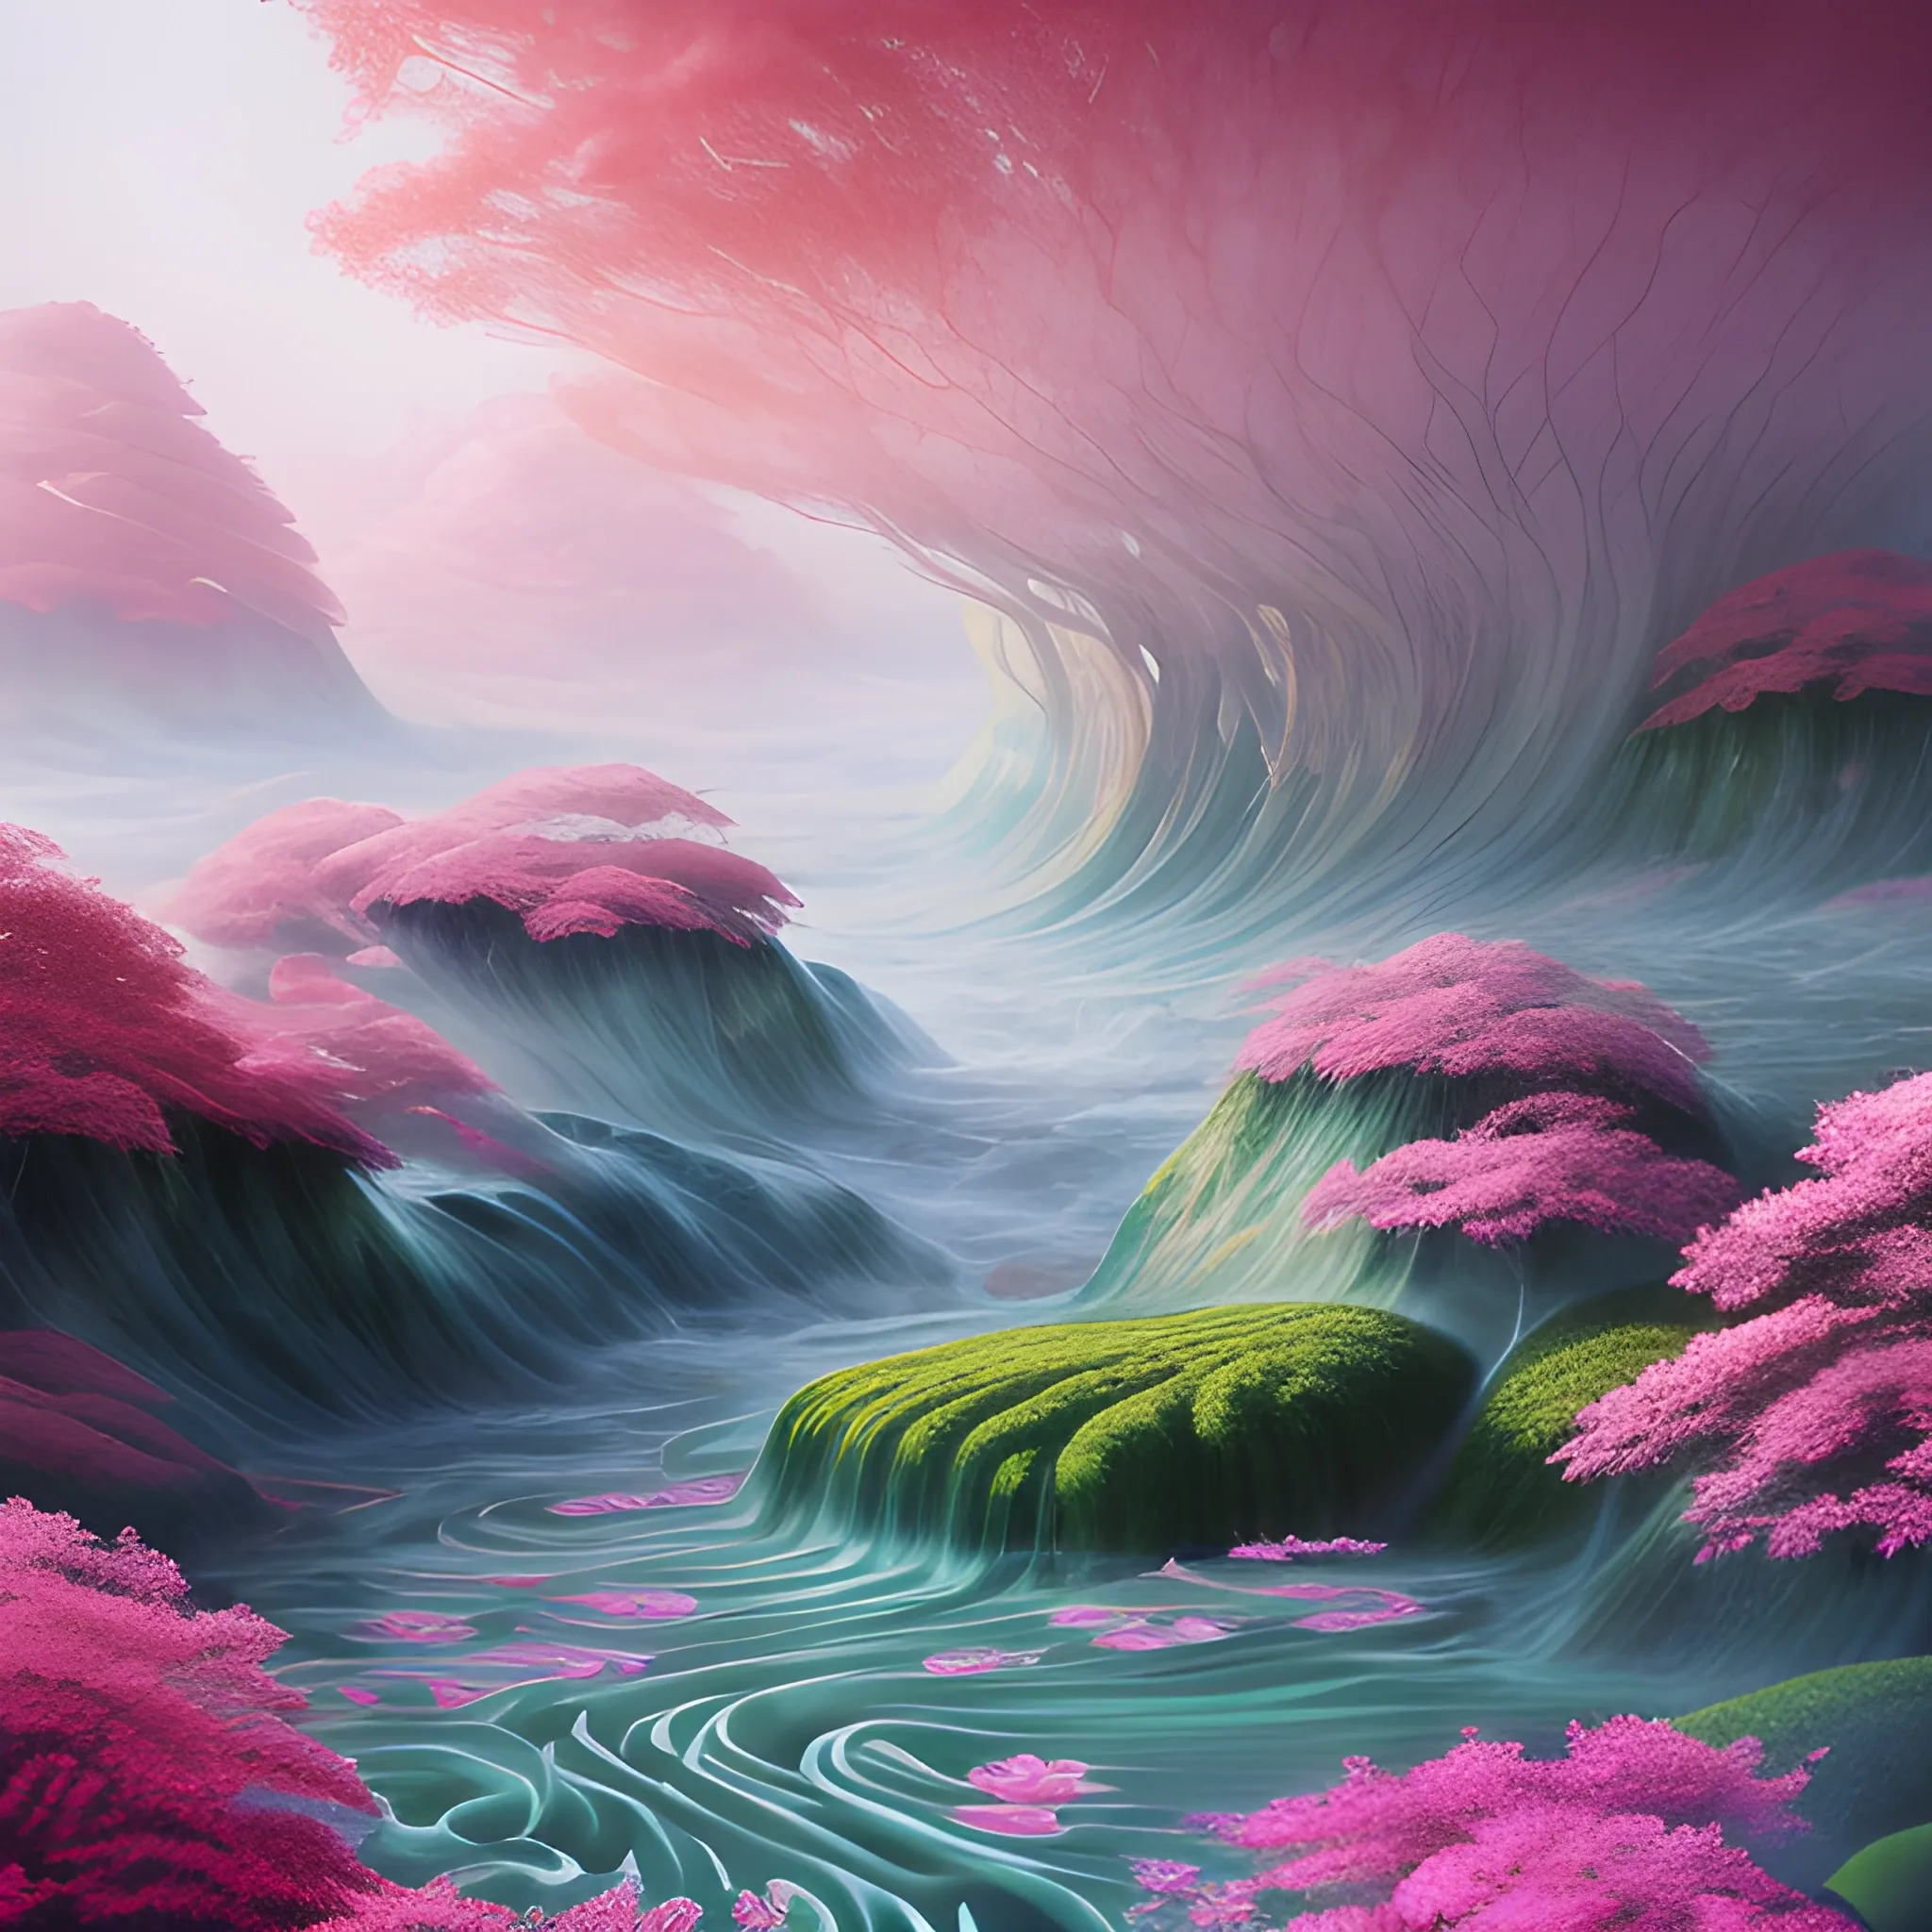 (by Ananta Mandal (and Andrew Biraj:0.5)), (in the style of nihonga), Style: Abstract, Medium: Digital illustration, Subject: An otherworldly landscape with floating islands, cascading waterfalls, and vibrant flora and fauna. Camera Angle: Overhead shot capturing the vastness and intricate details of the scene. The colors are saturated, and the lighting creates a warm and ethereal atmosphere. The painting is highly detailed, with every brushstroke capturing the complexity of the imaginary world., (high quality), (detailed), (masterpiece), (best quality), (highres), (extremely detailed), (8k), seed:792315689